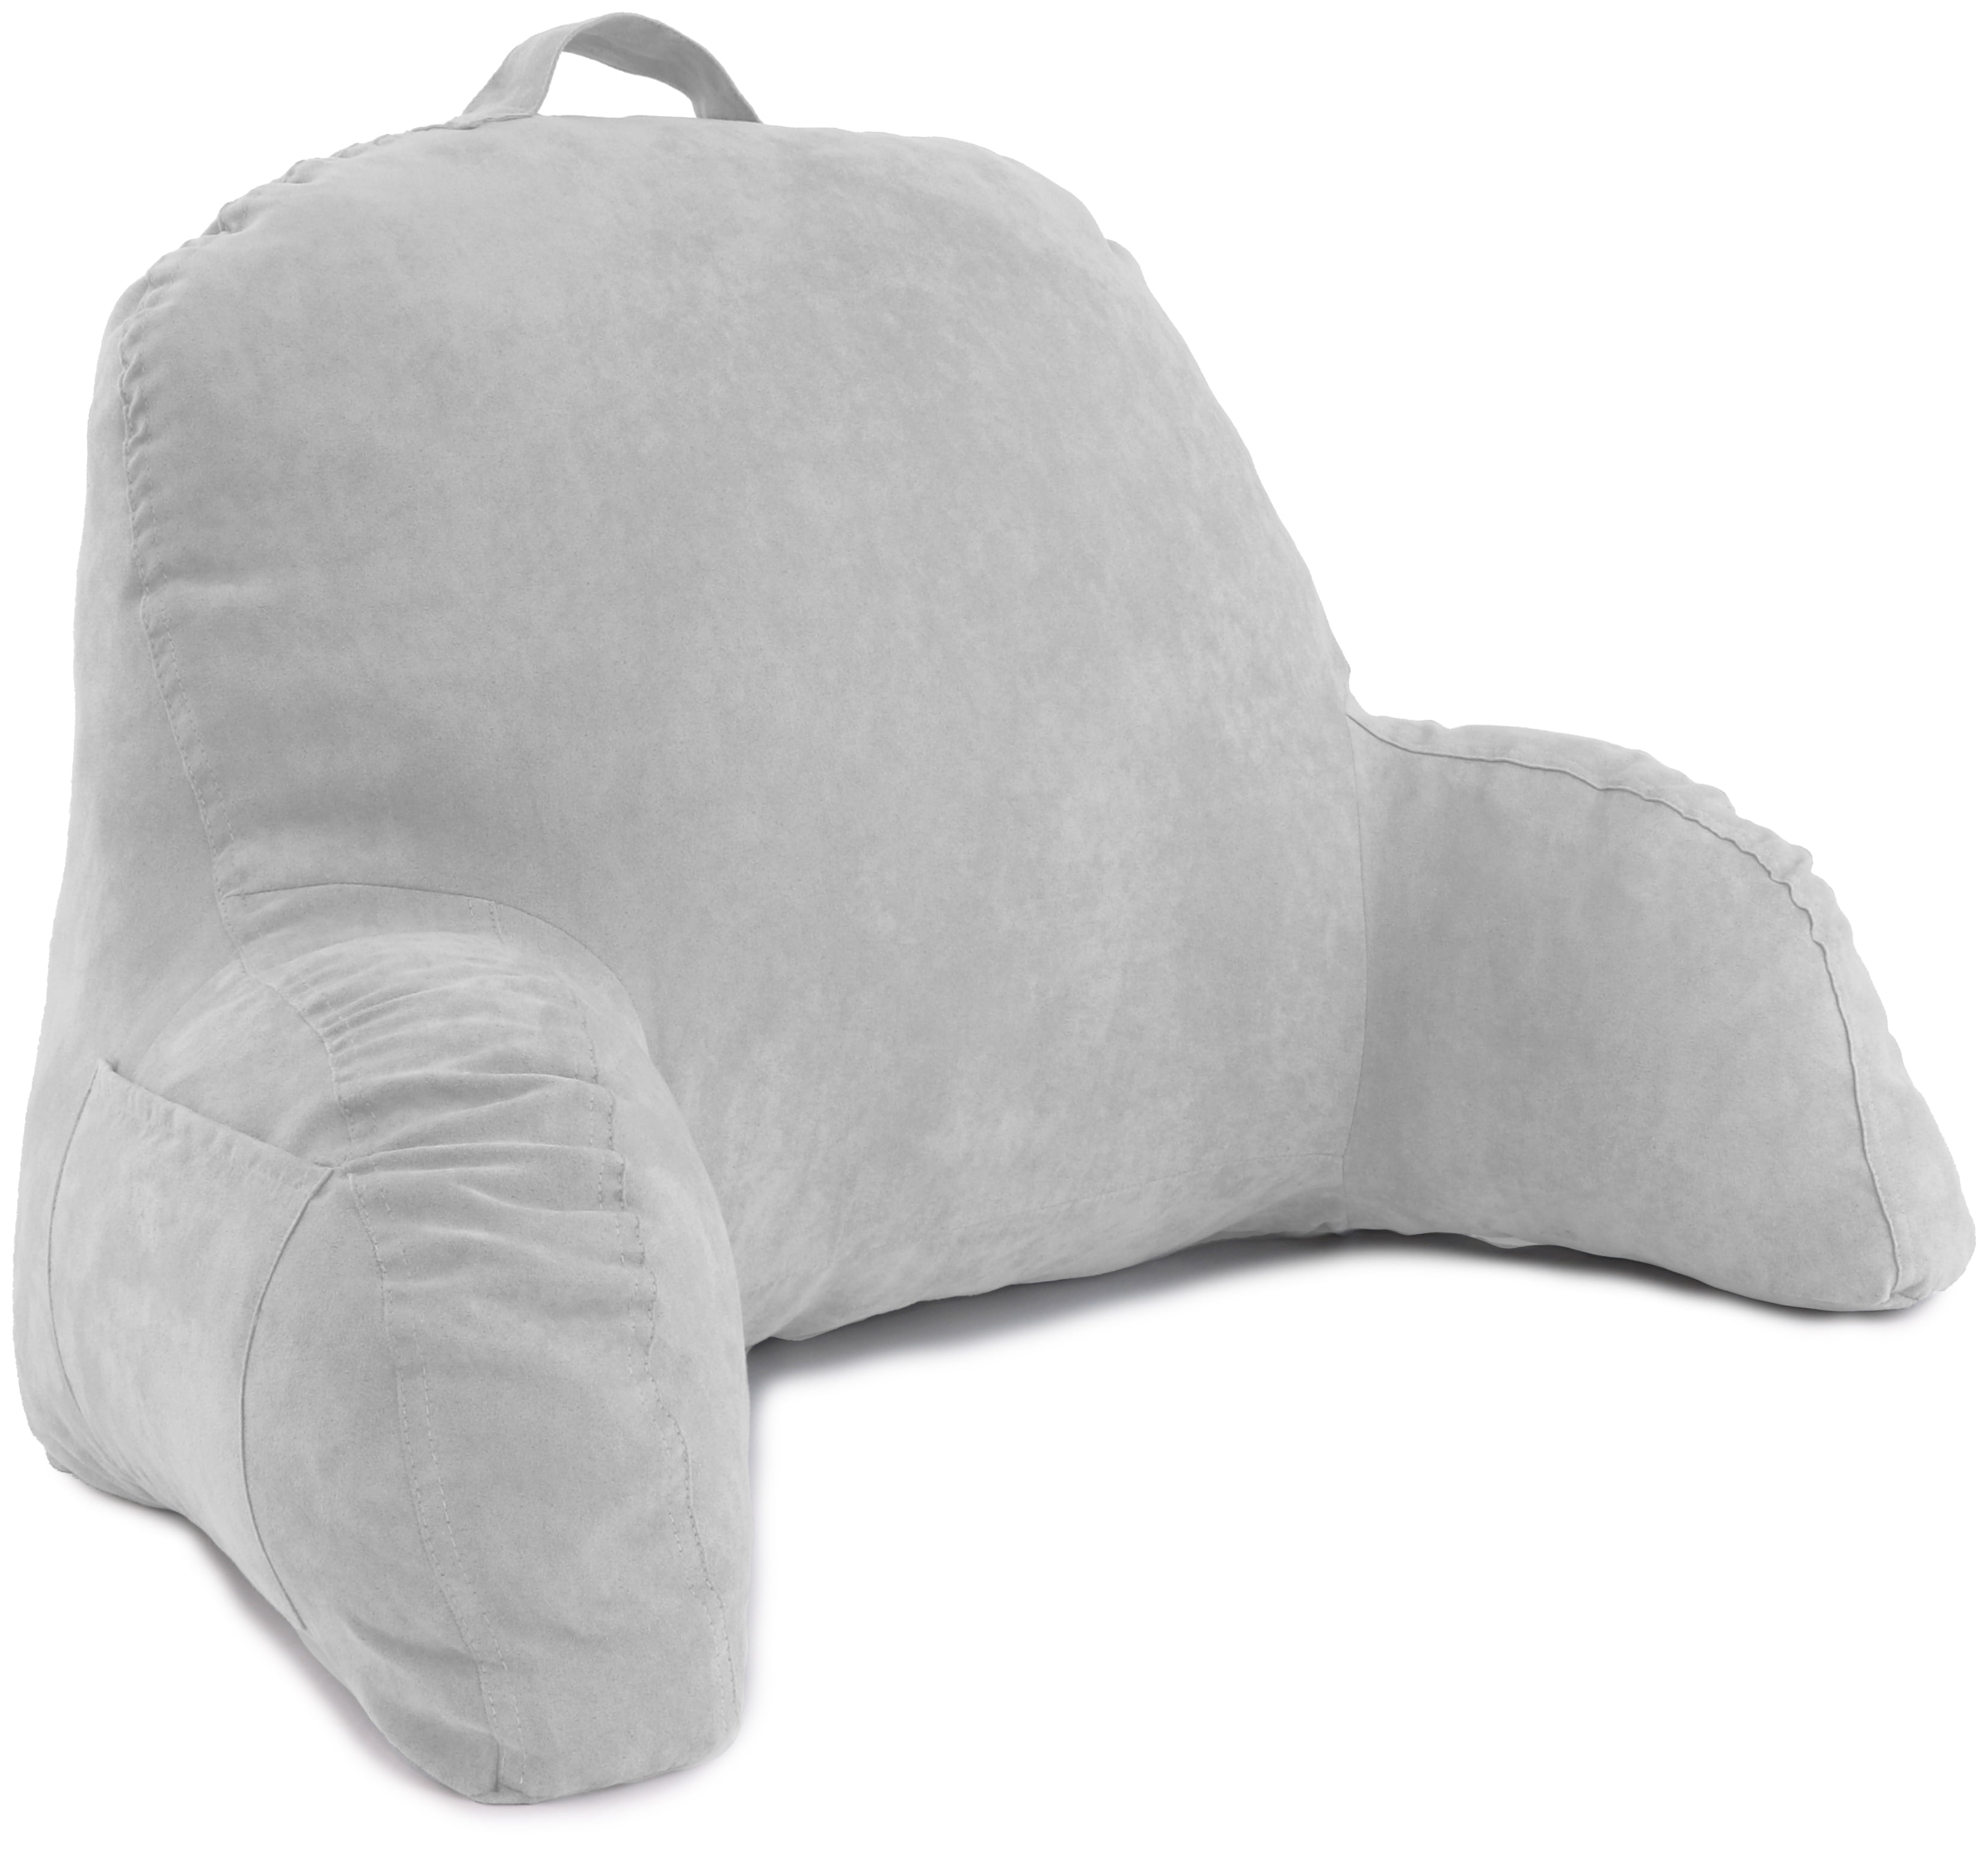 bed rest pillow with arms target